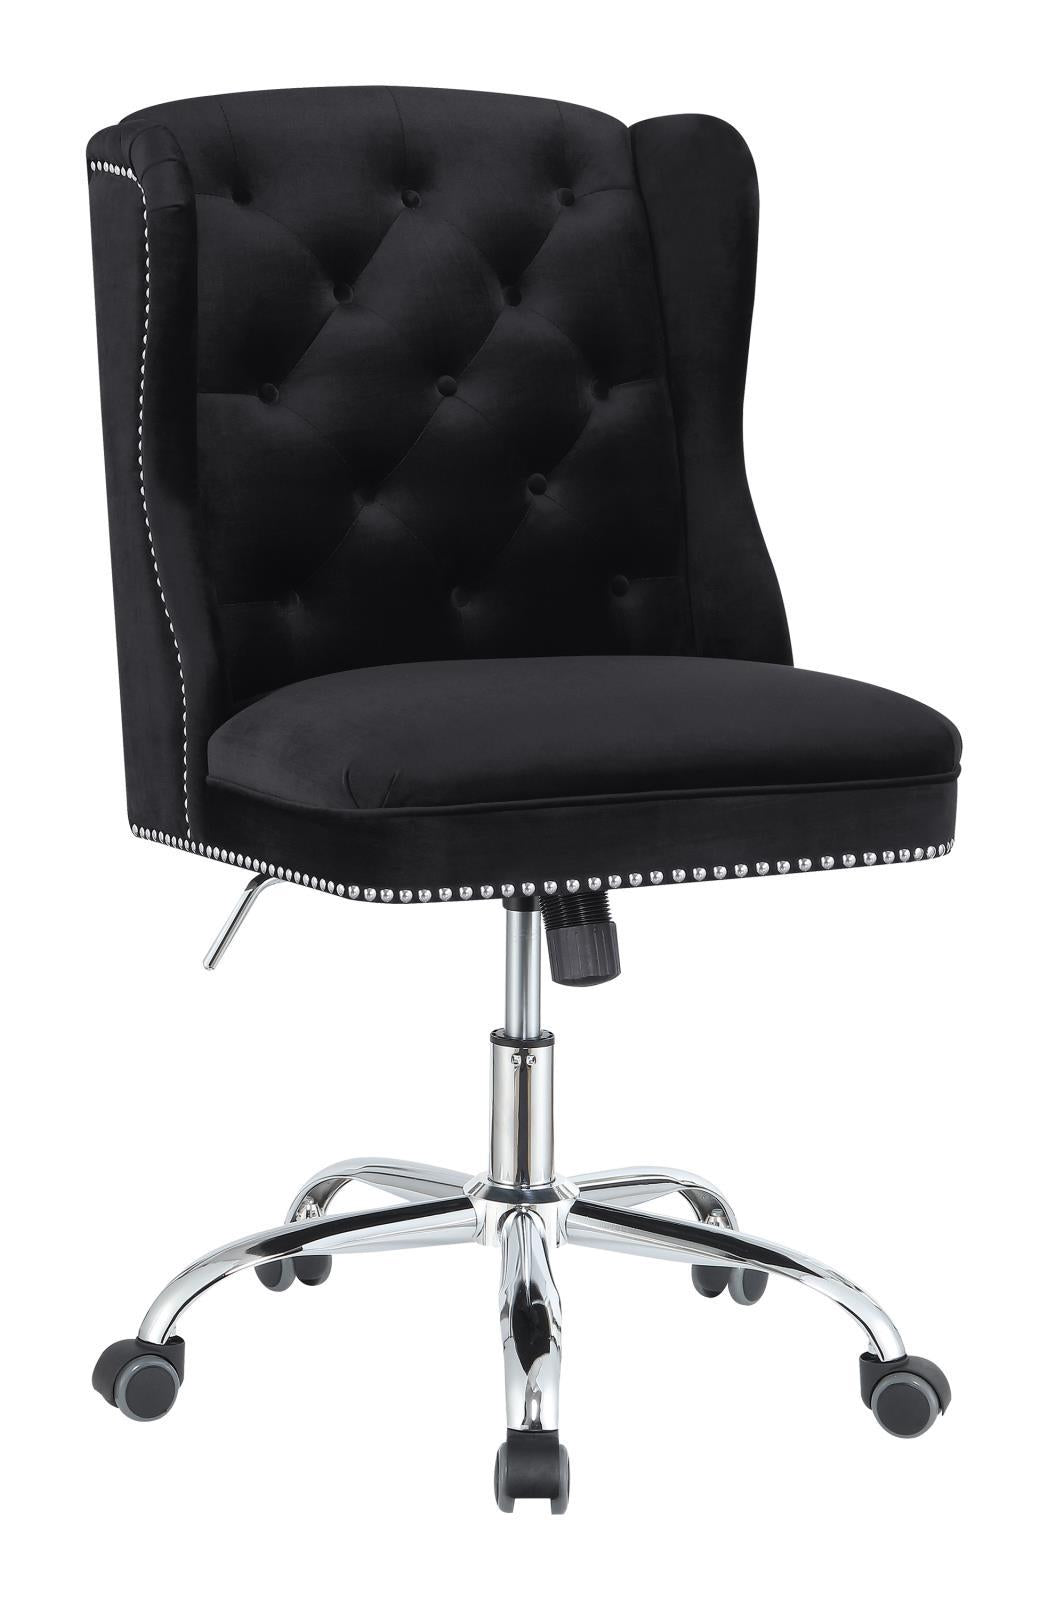 Julius Upholstered Tufted Office Chair Black and Chrome Julius Upholstered Tufted Office Chair Black and Chrome Half Price Furniture